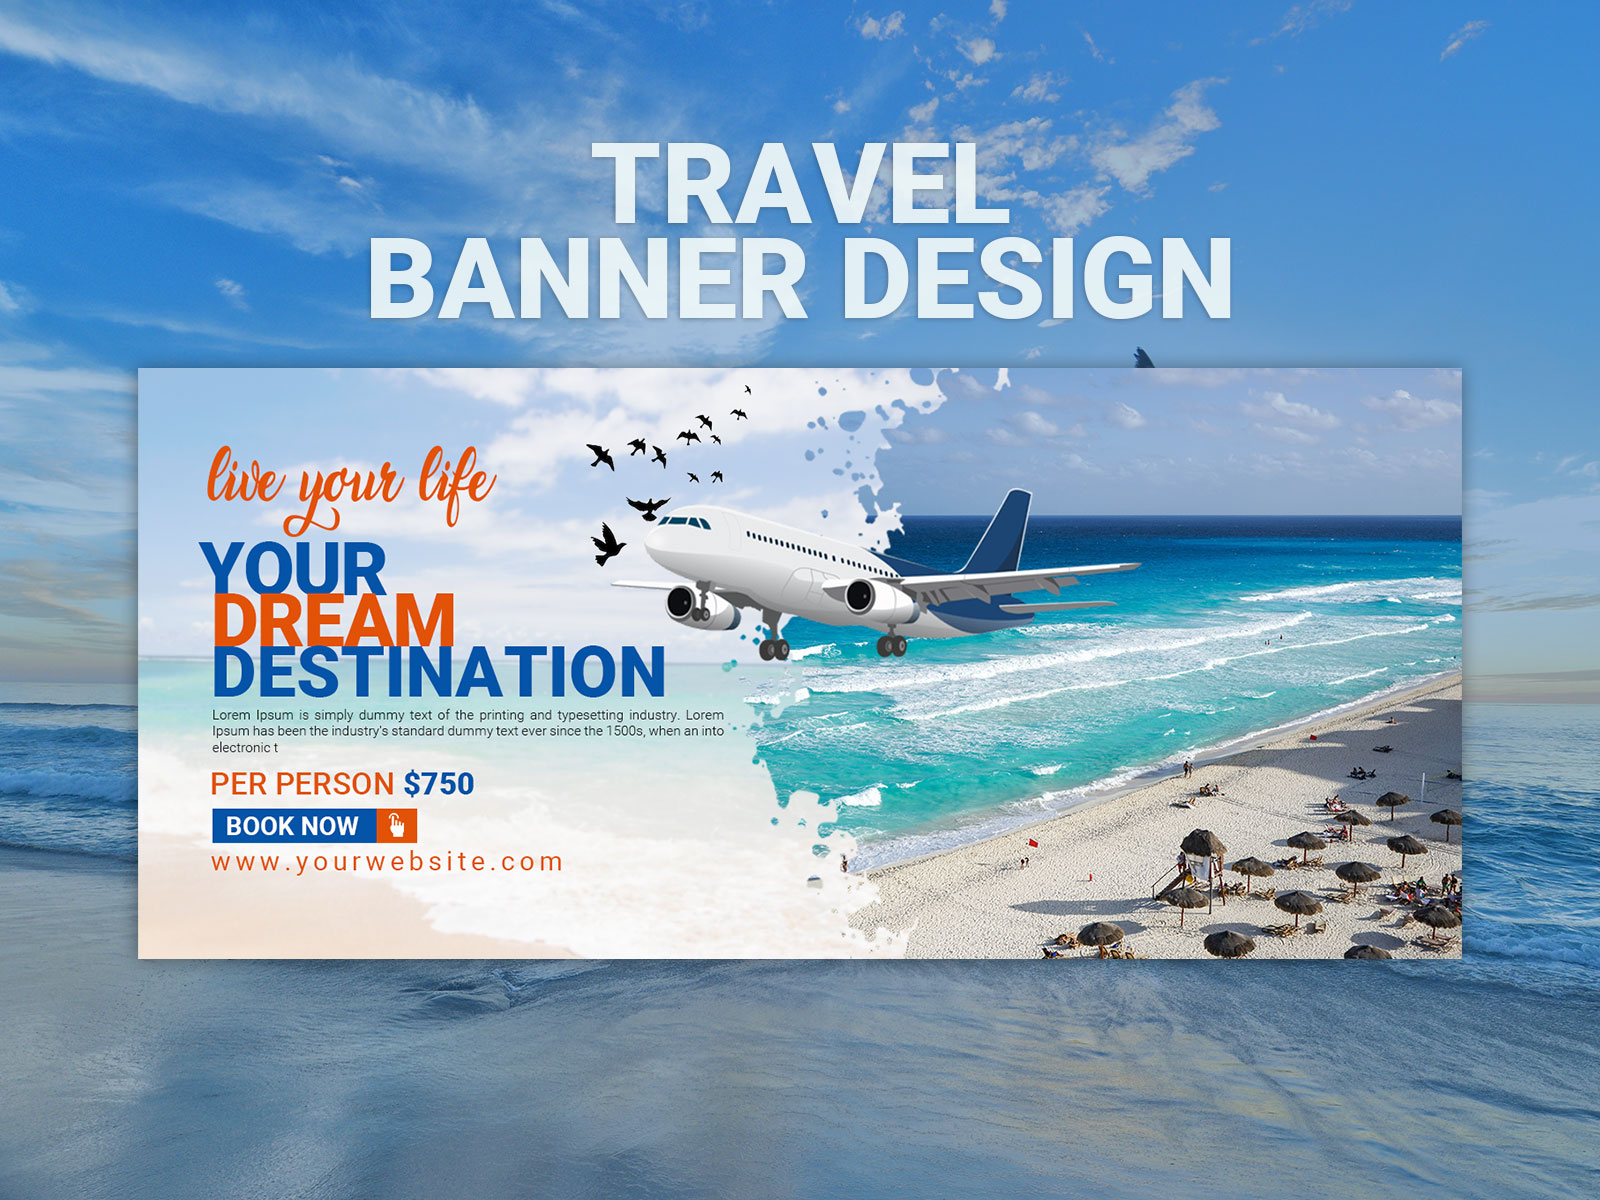 tours and travels banner design